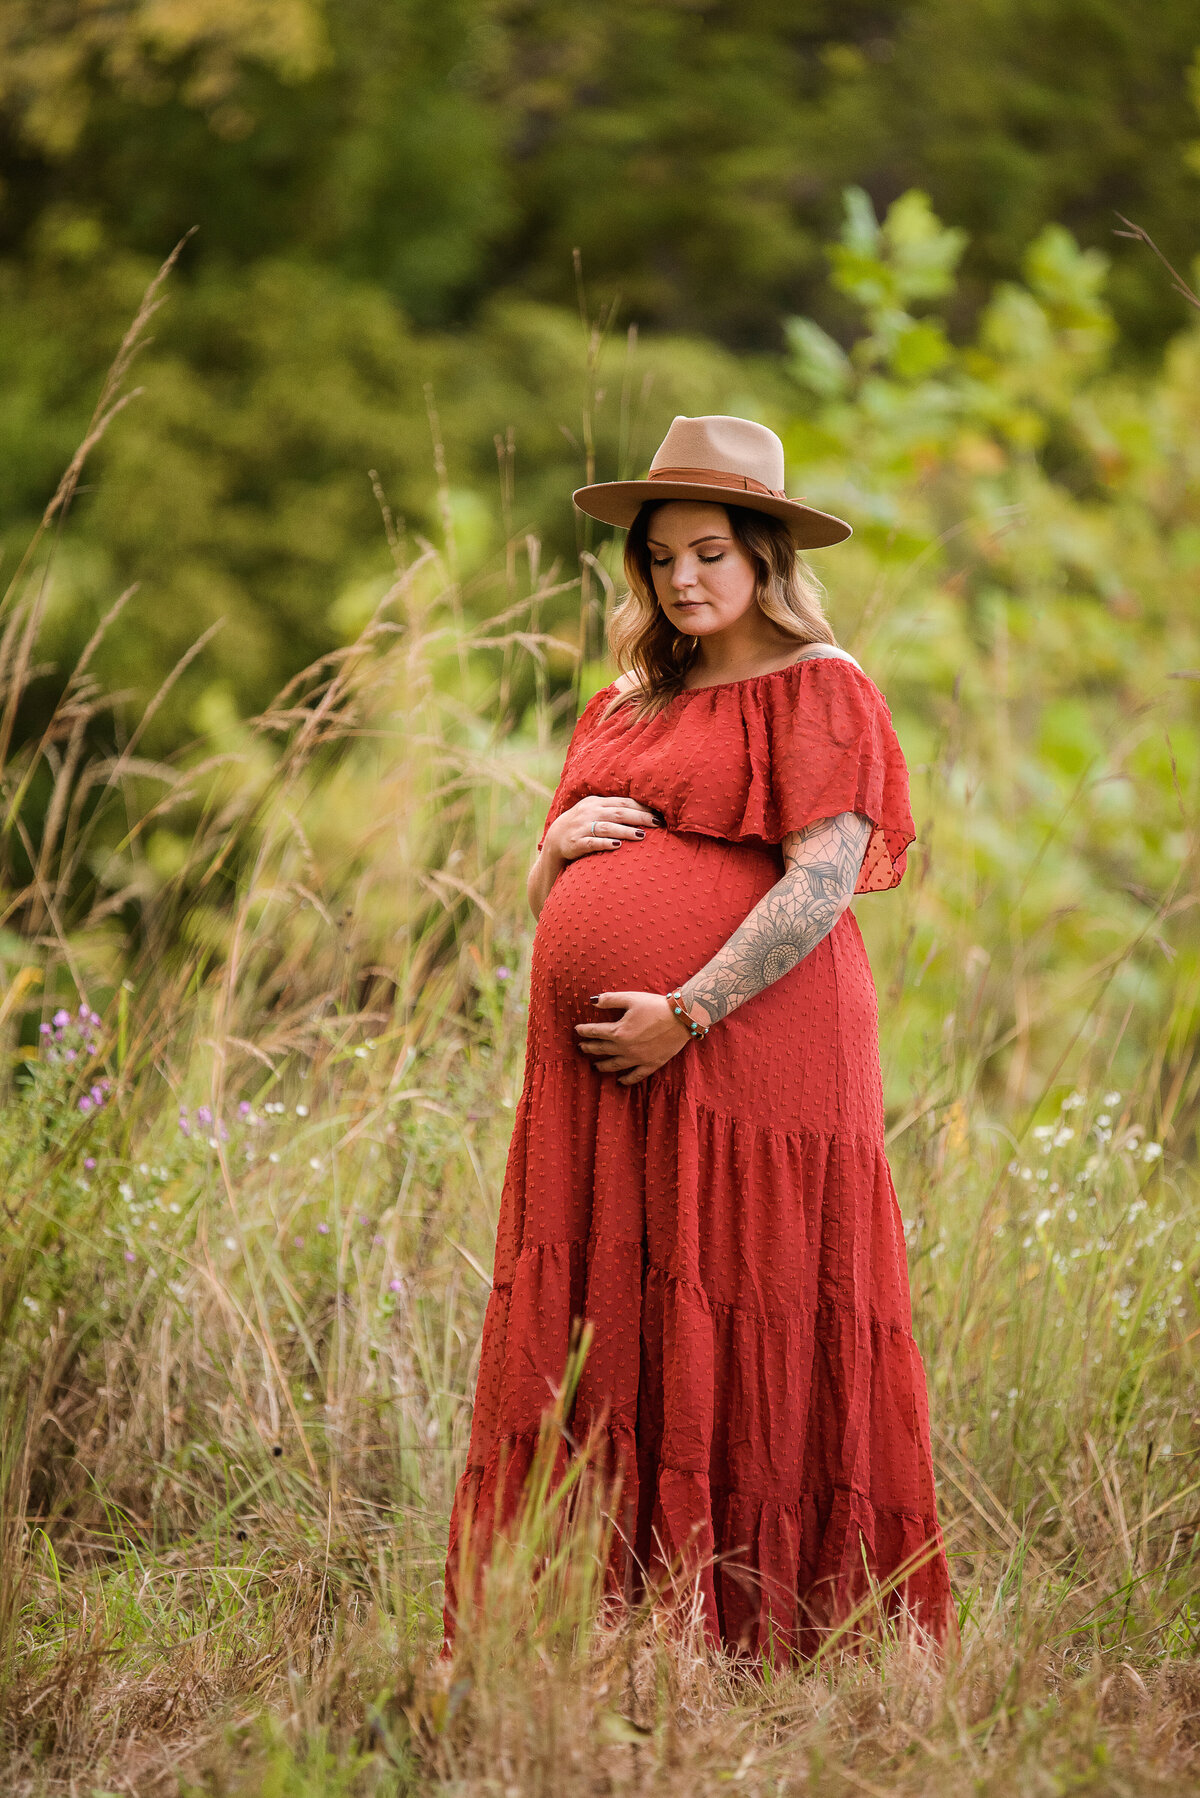 best maternity photography West Lafayette IN, get maternity pictures taken